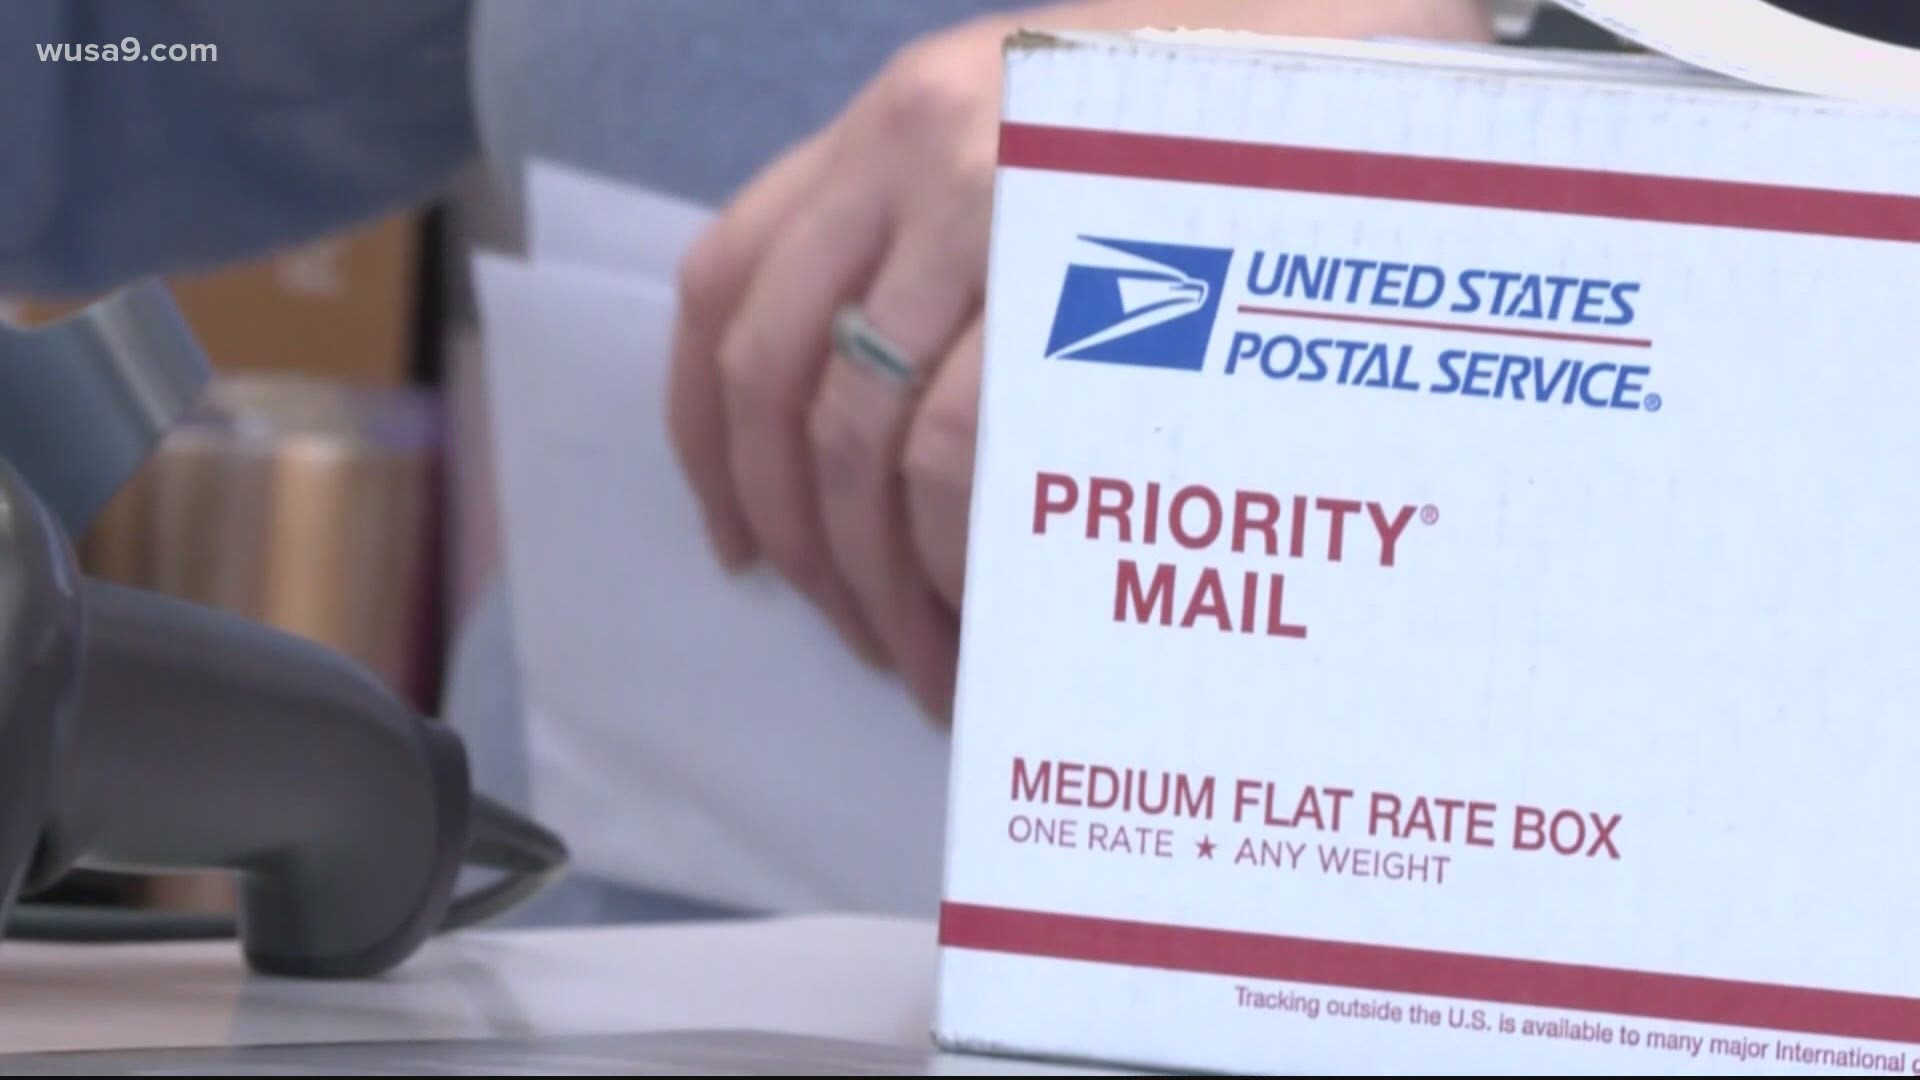 One in five pieces of mail across the U.S. was delivered late to households and businesses in the first three months of 2021, according to postal agency data.